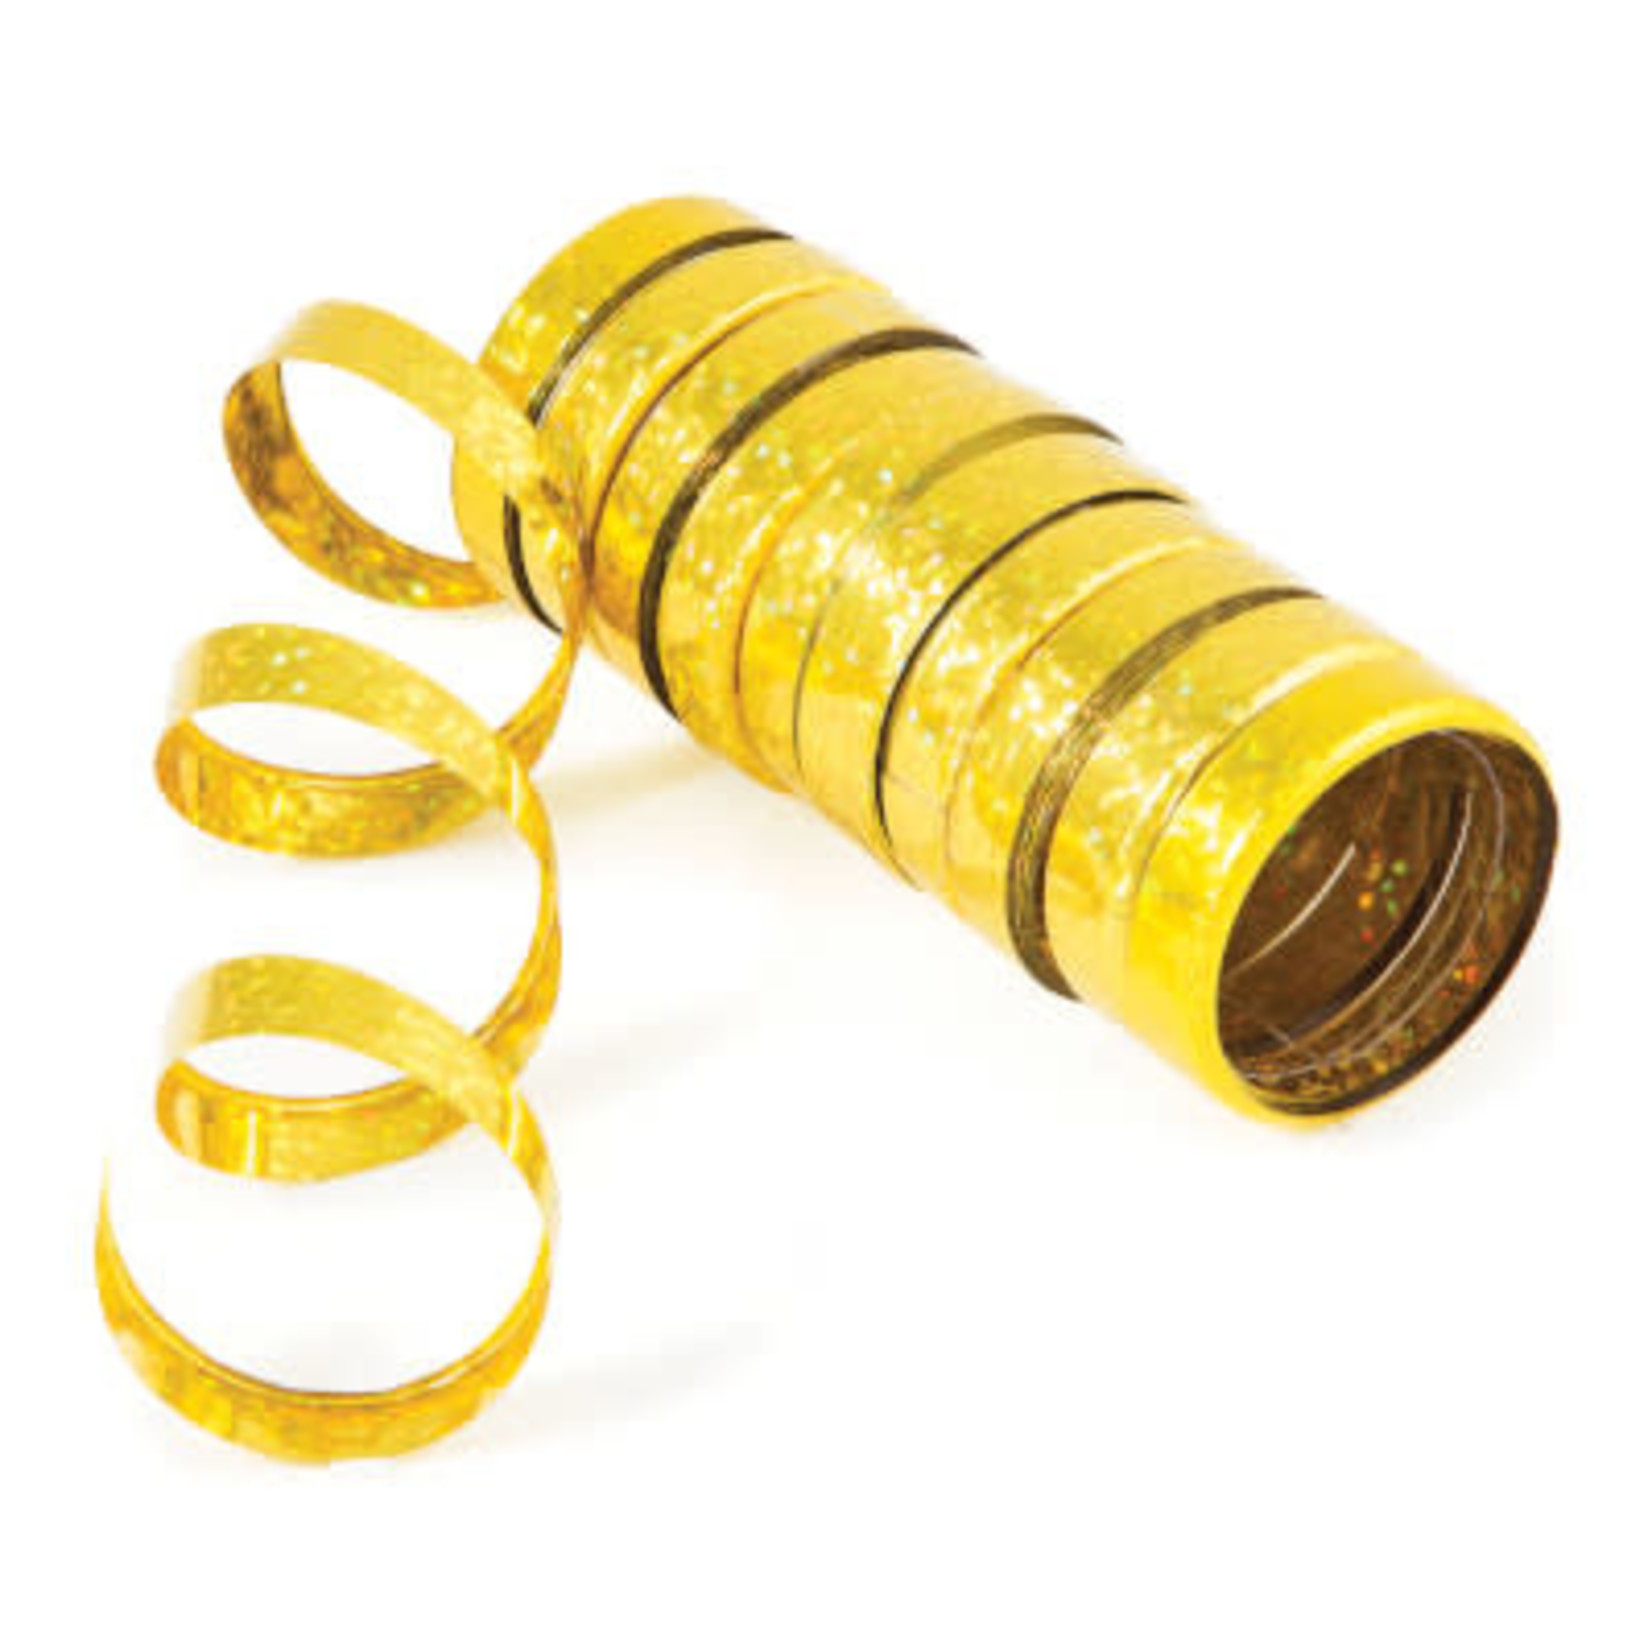 Gold streamers set. Golden serpentine ribbons, isolated on